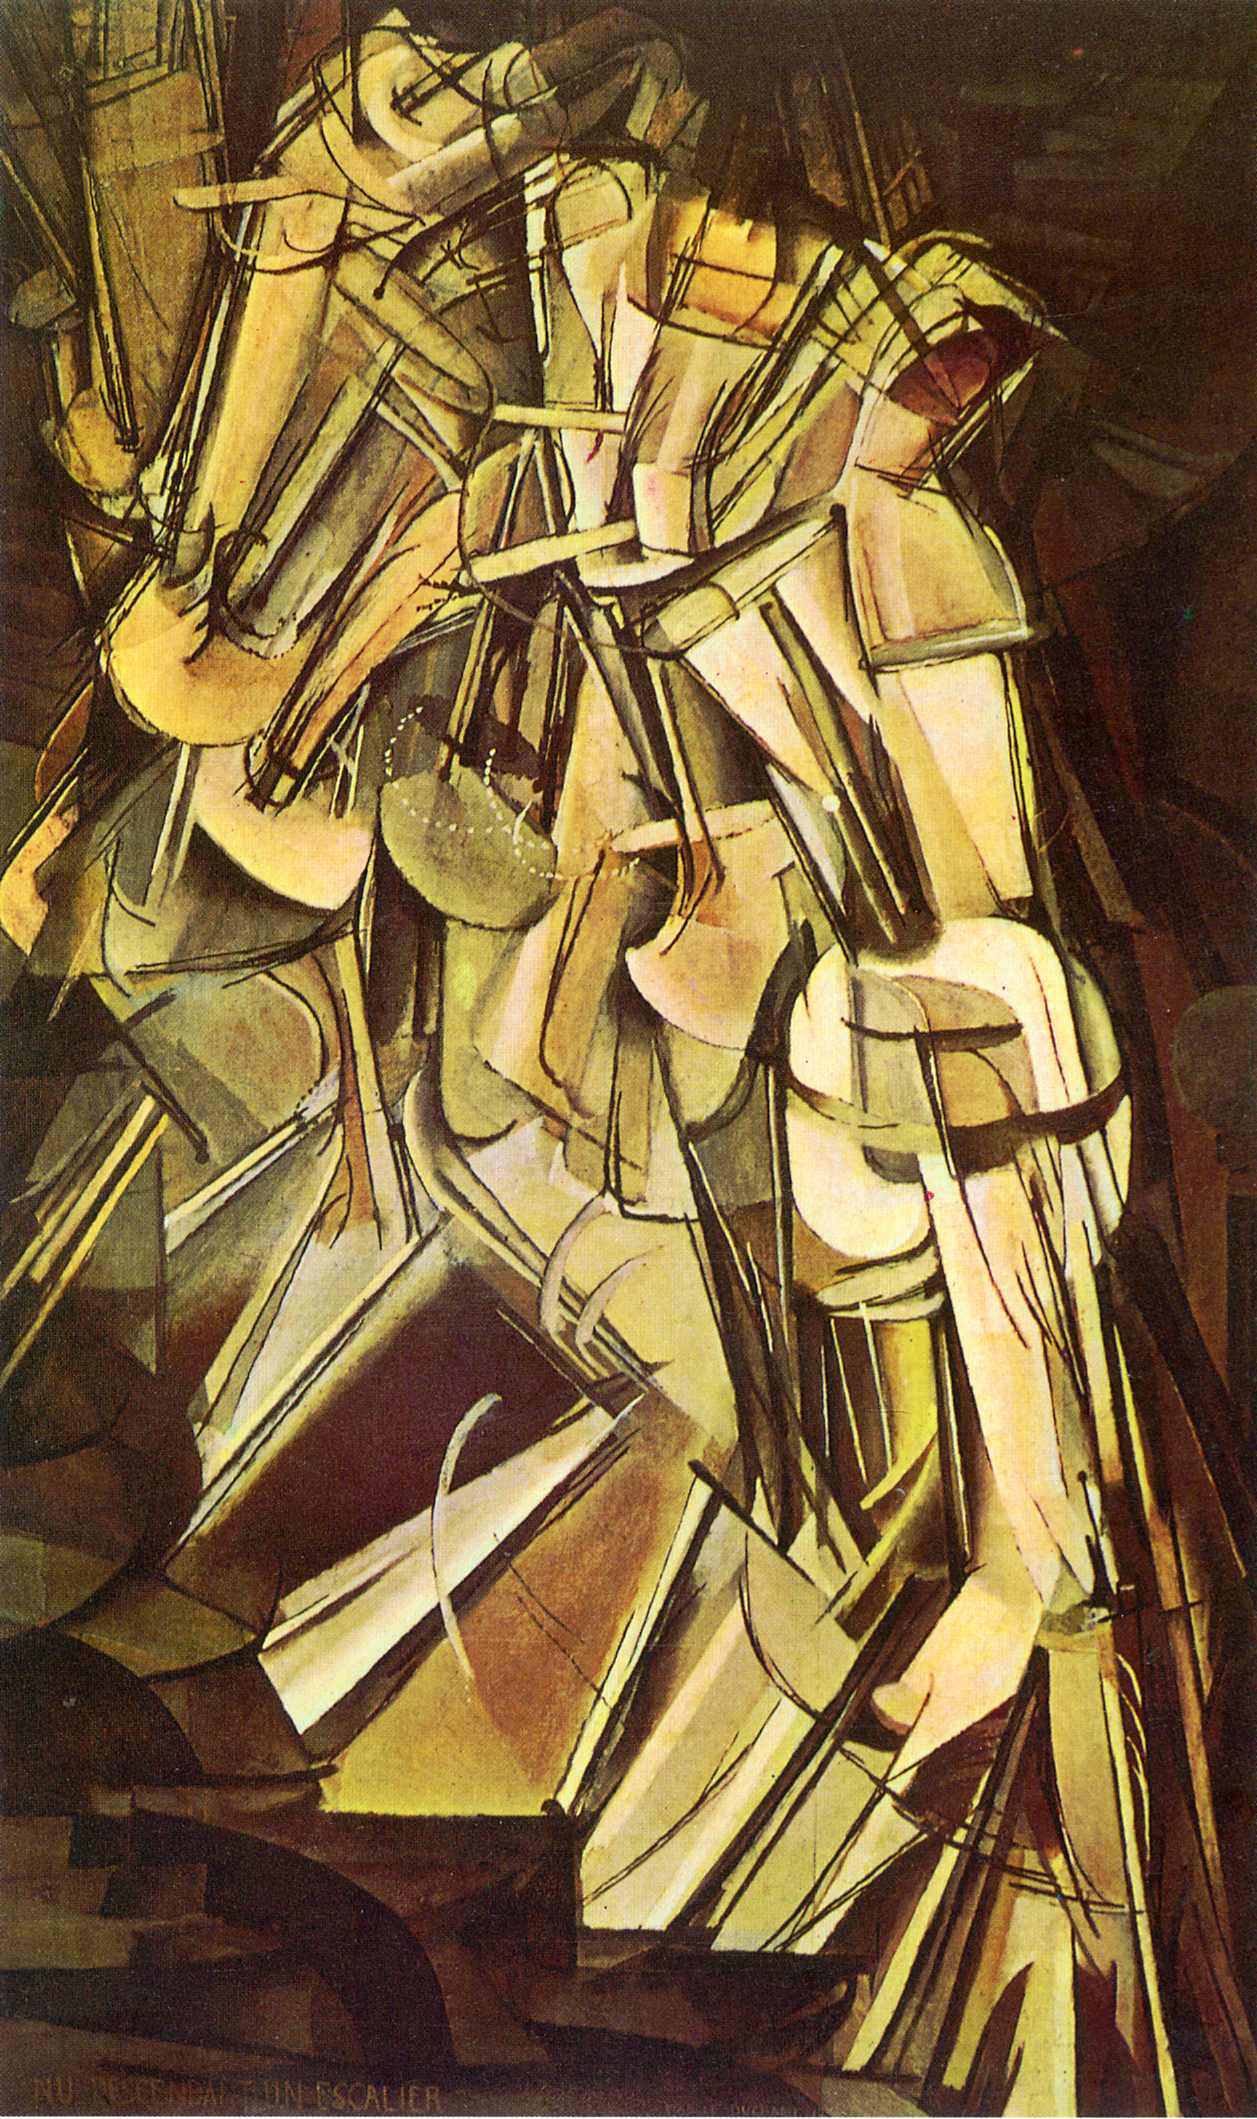 Nude Descending a Staircase, No. 2, 1912 by Marcel Duchamp.